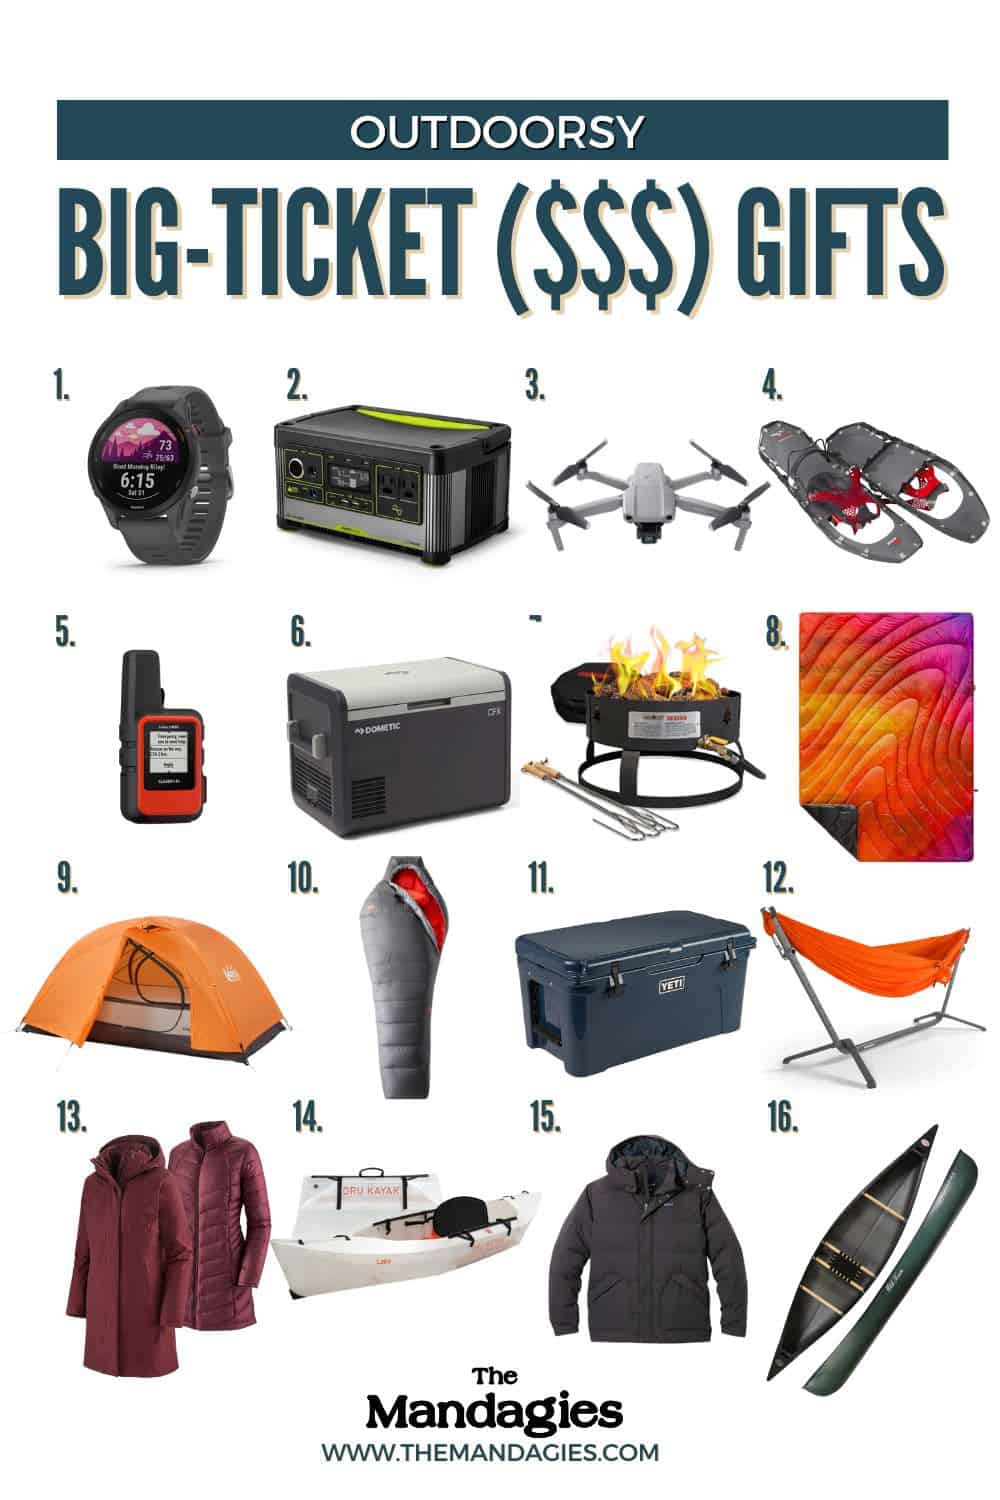 Big Ticket Gift Ideas for the Outdoors - Pin2